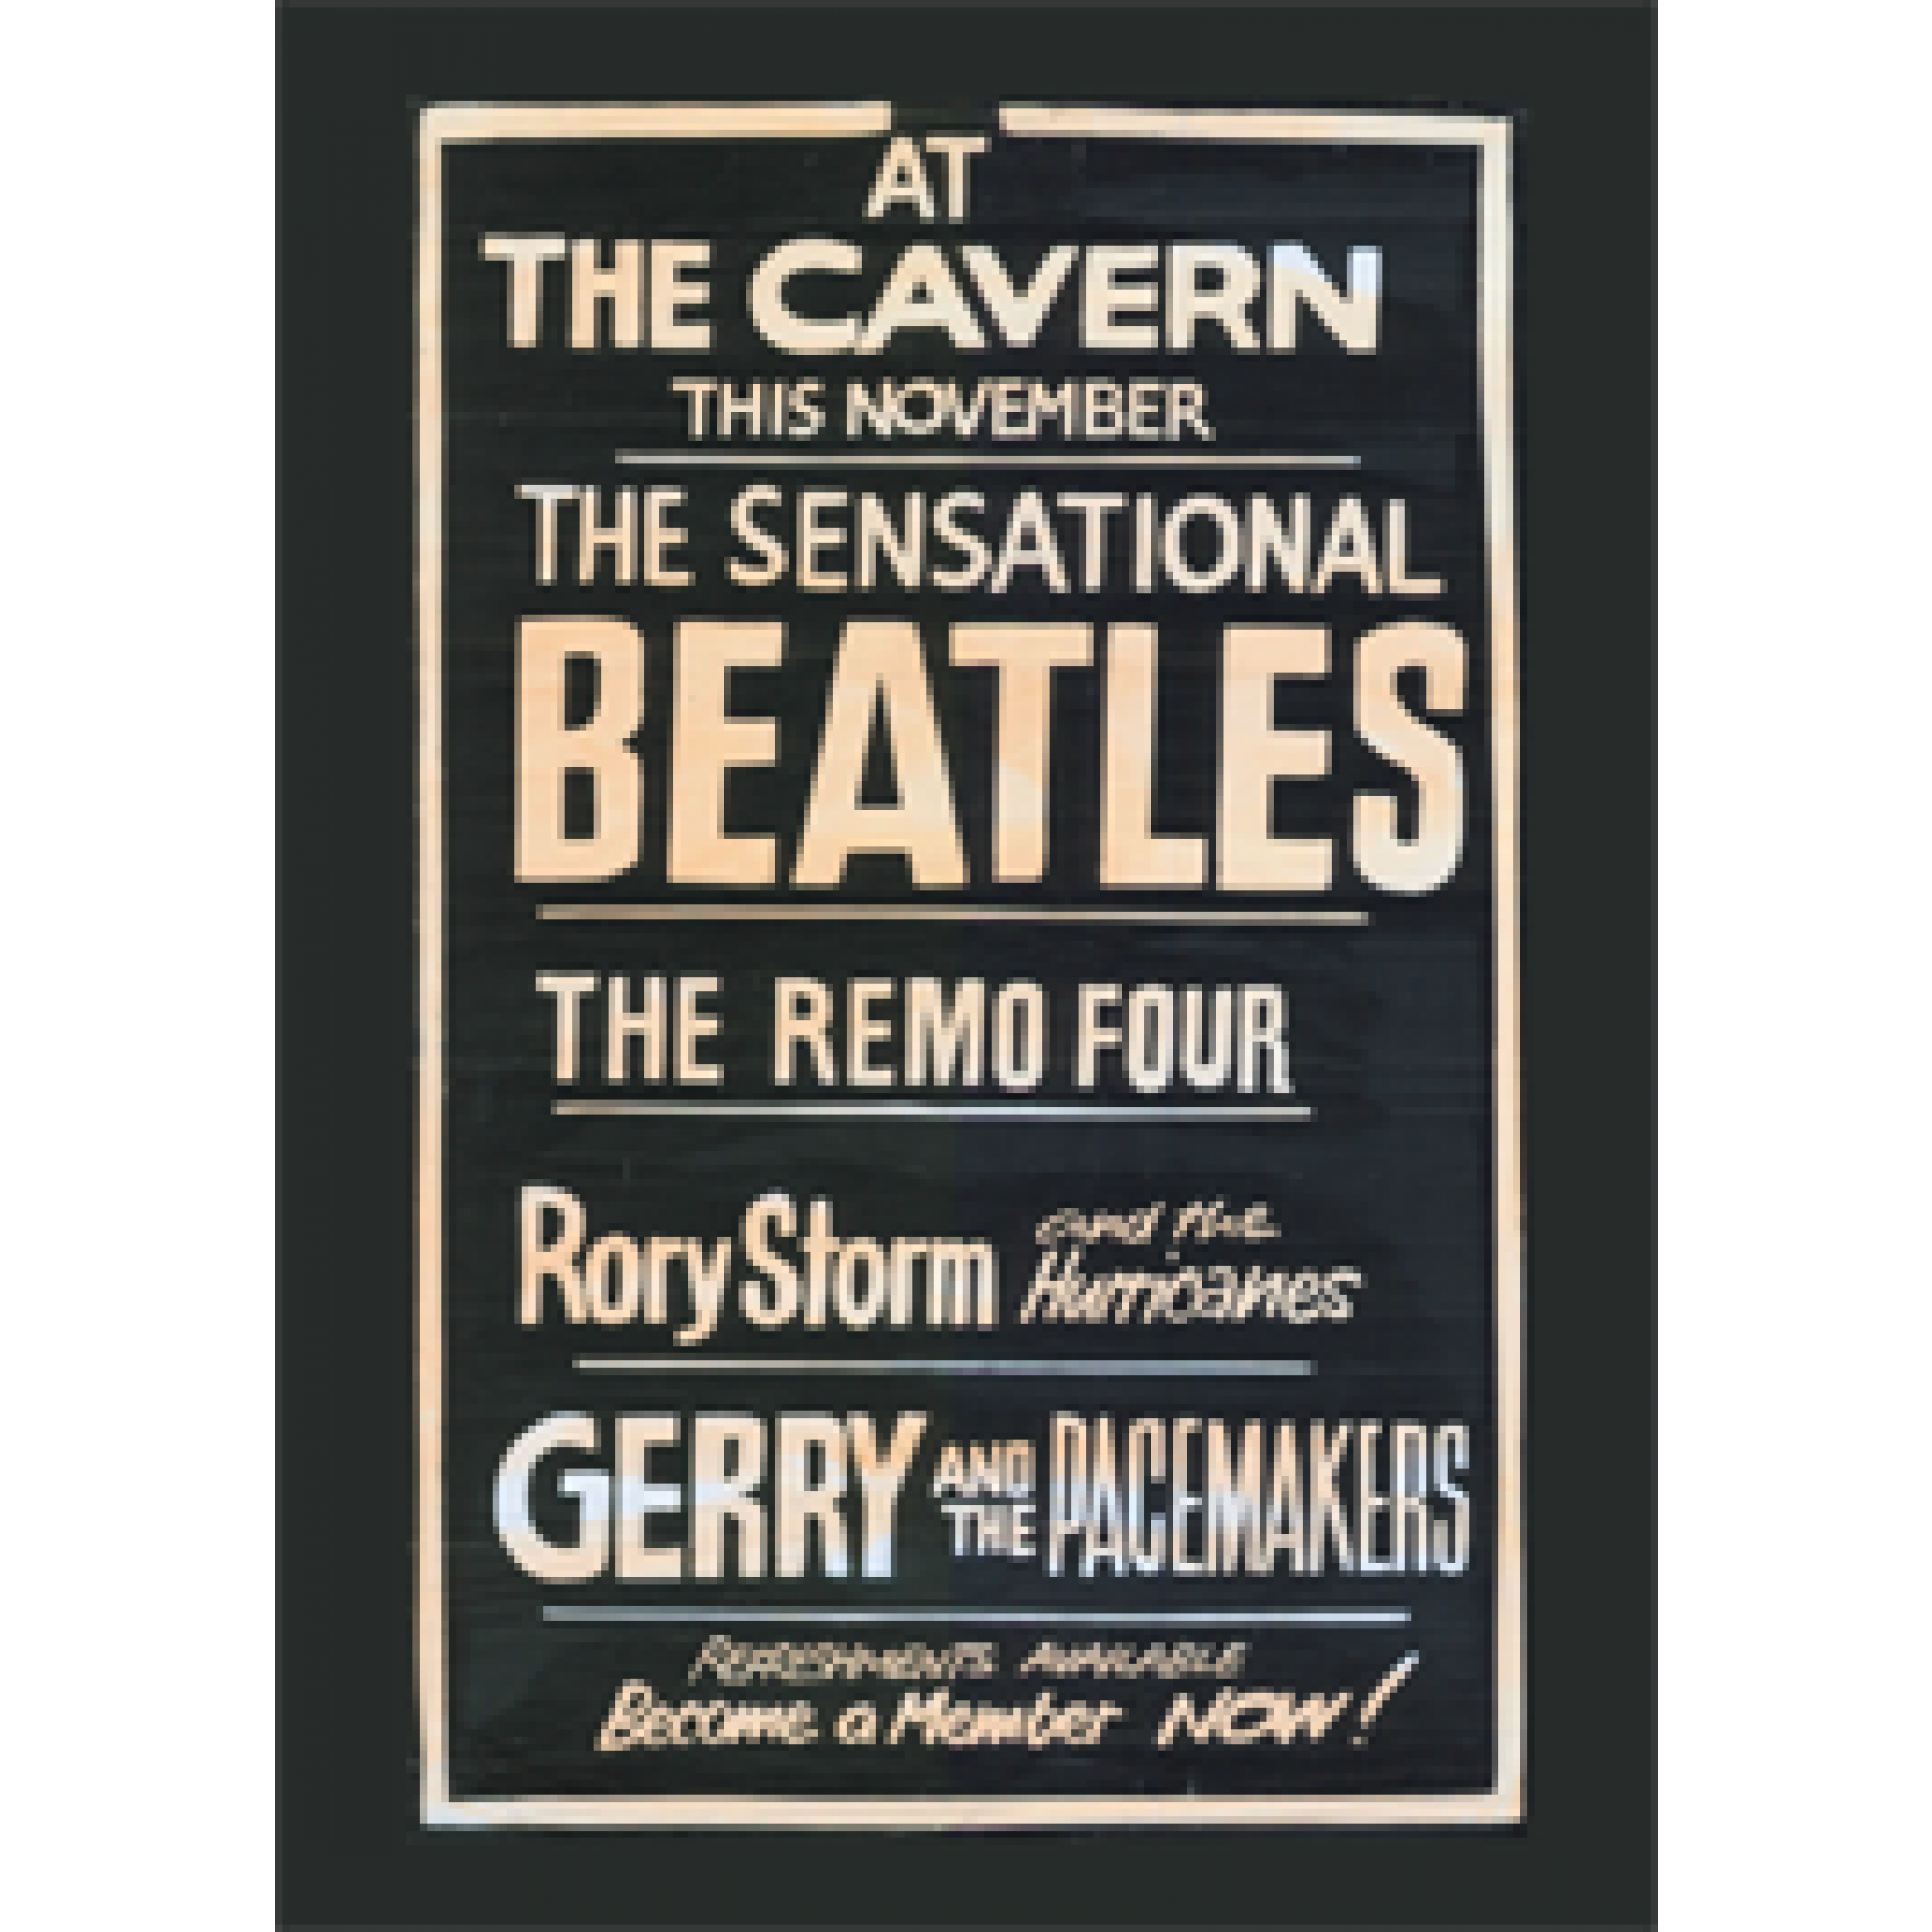 The Cavern Print The Cavern Club Beatles Poster Repro Beatles Poster 